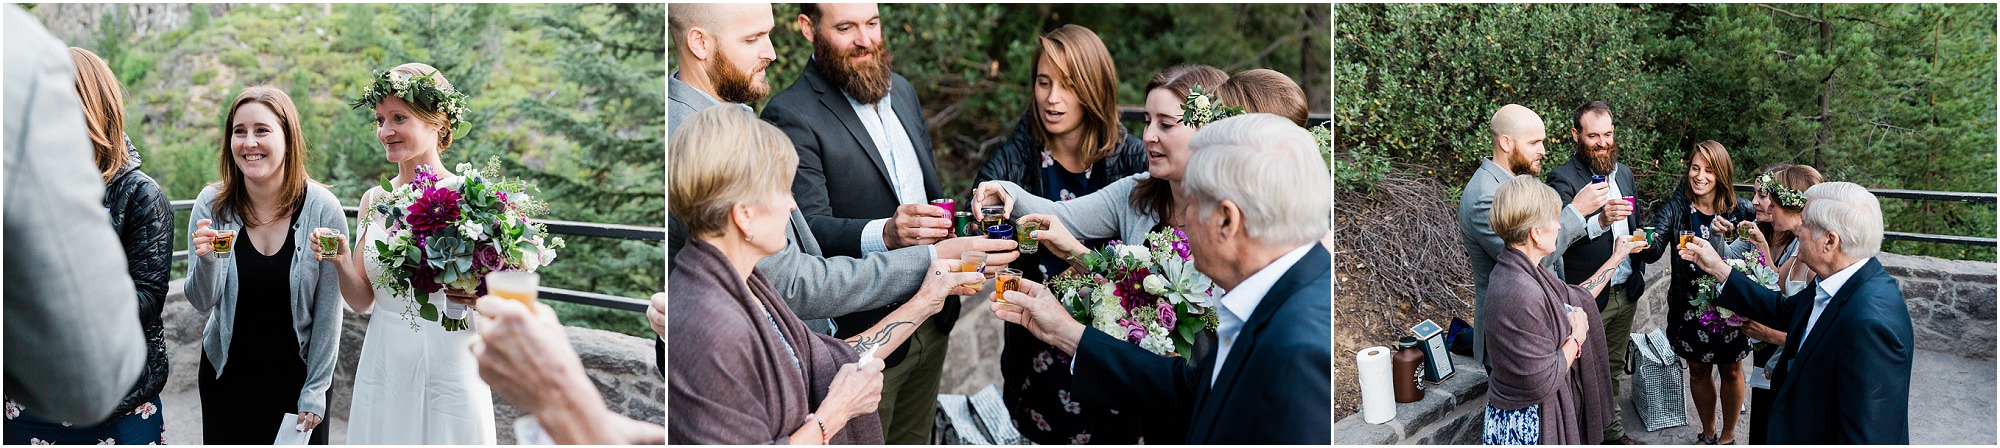 A small gathering of friends & family toasts the bride & groom with whiskey shots after a sunrise elopement in Bend, Oregon. | Erica Swantek Photography